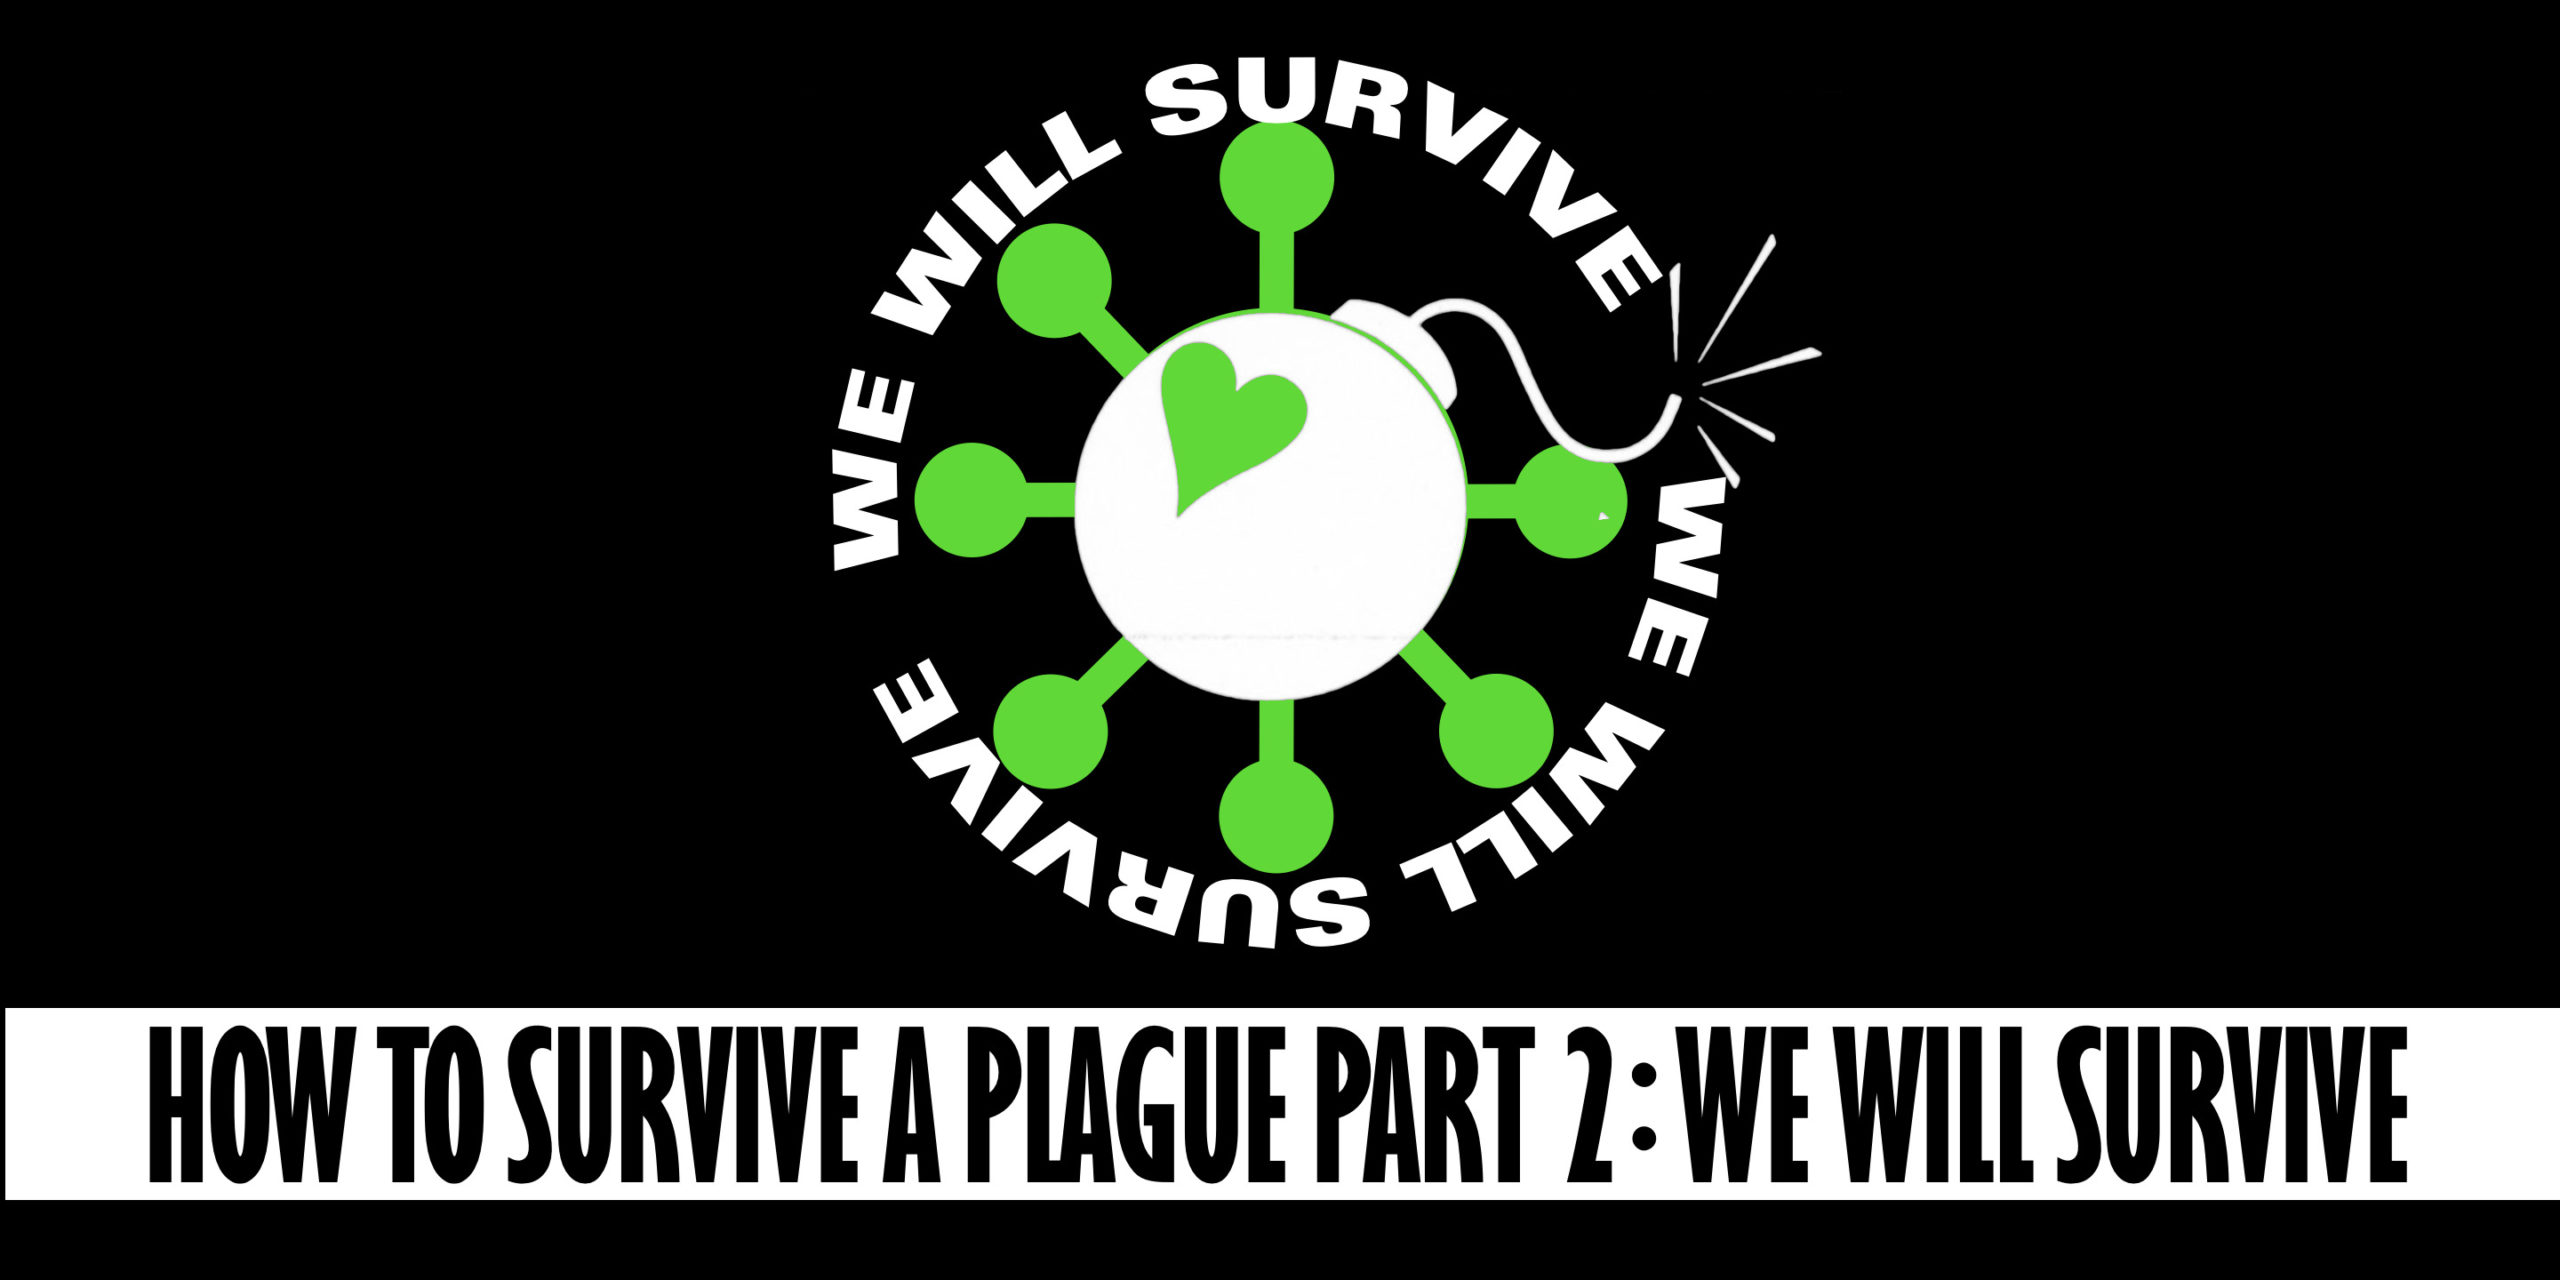 RC 345: How To Survive A Plague Part 2: We Will Survive